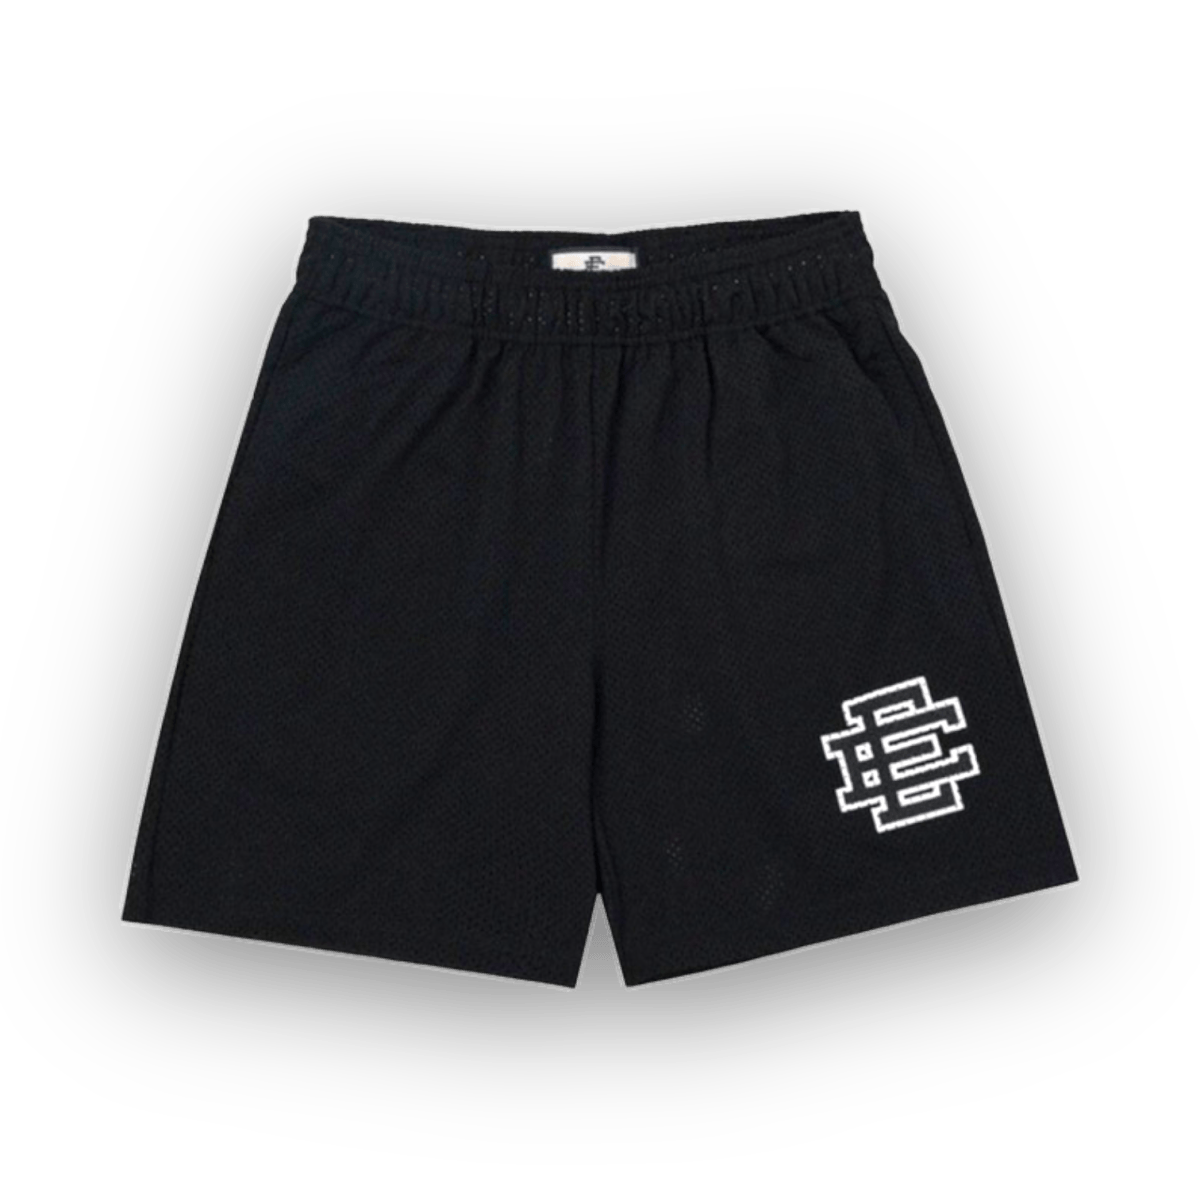 Eric Emanuel EE Shorts - SS23 Black - Shorts - Eric Emanuel - Jawns on Fire - sneakers